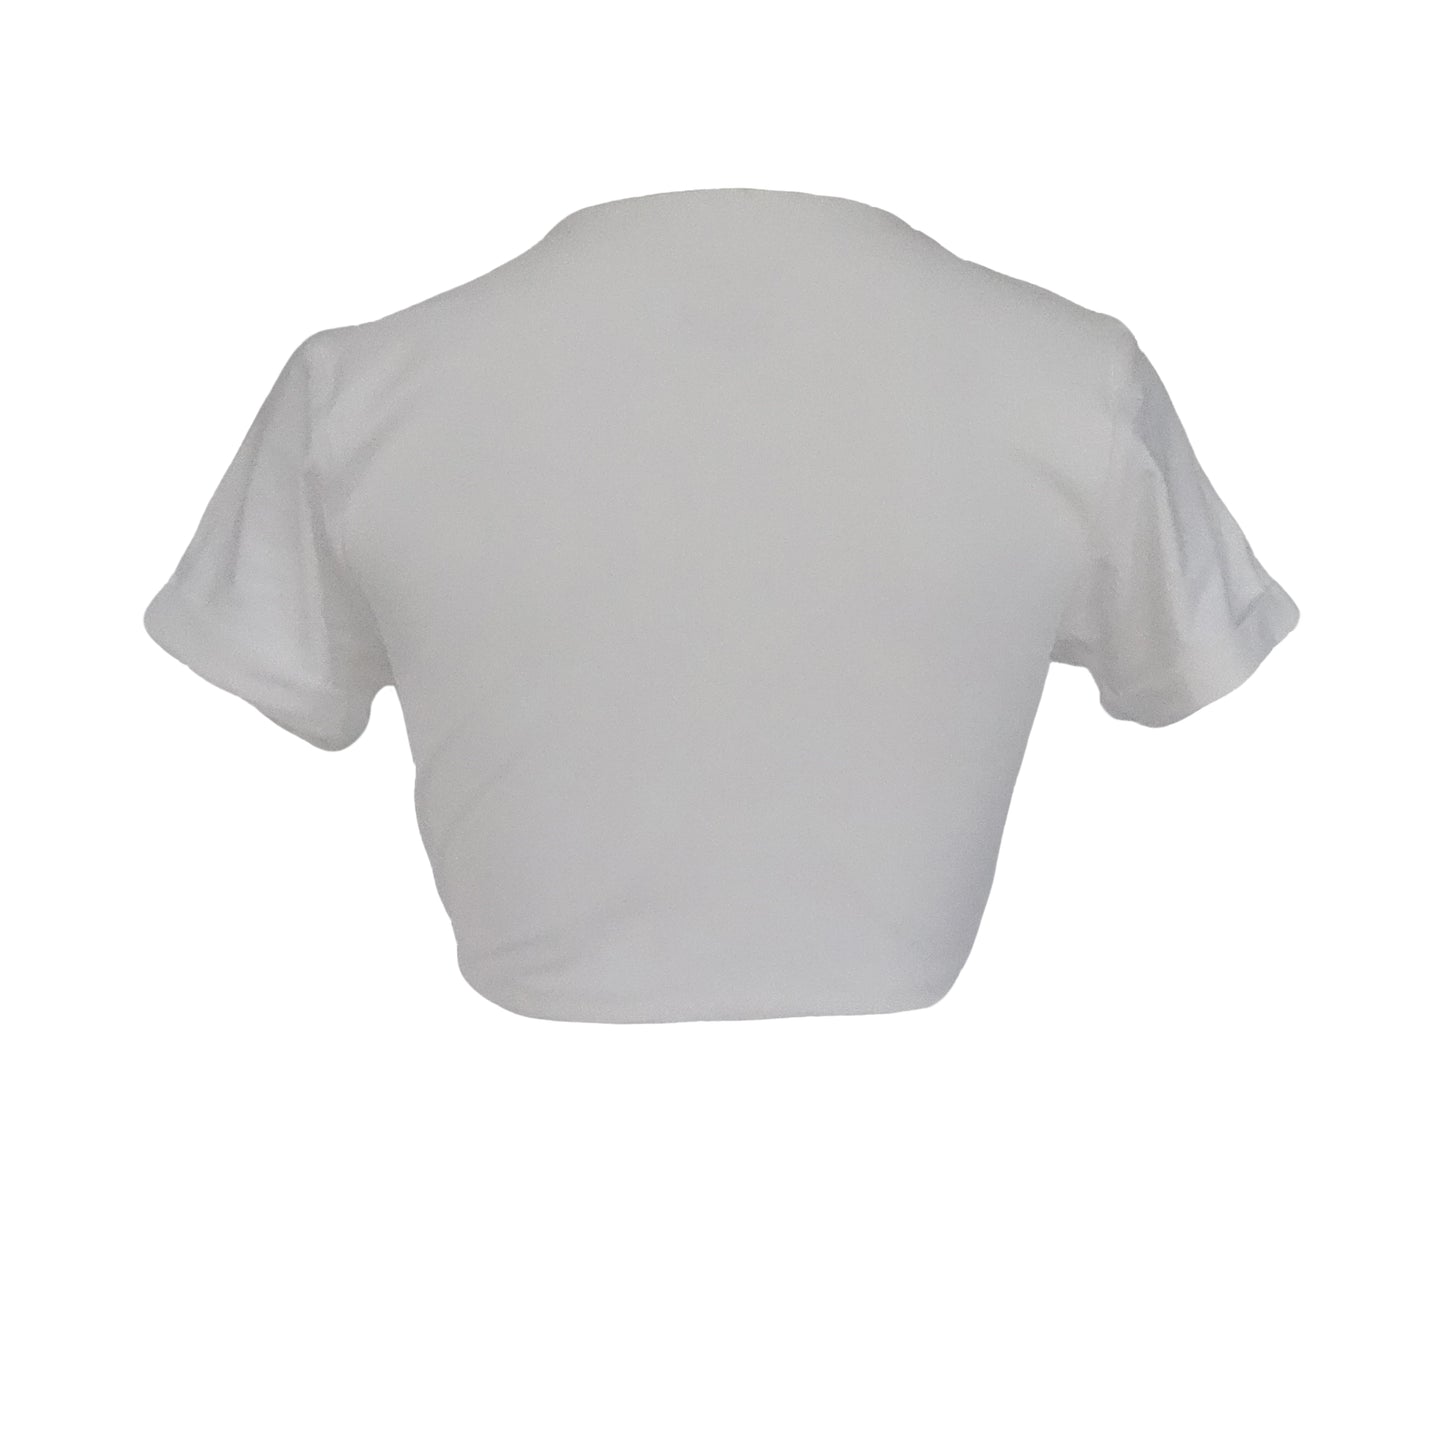 Back view of white short sleeve bikini top with adjustable tie front and rolled cuff short sleeves. This bikini top has a plunging neckline illusion and gives versatility to double as a crop top.